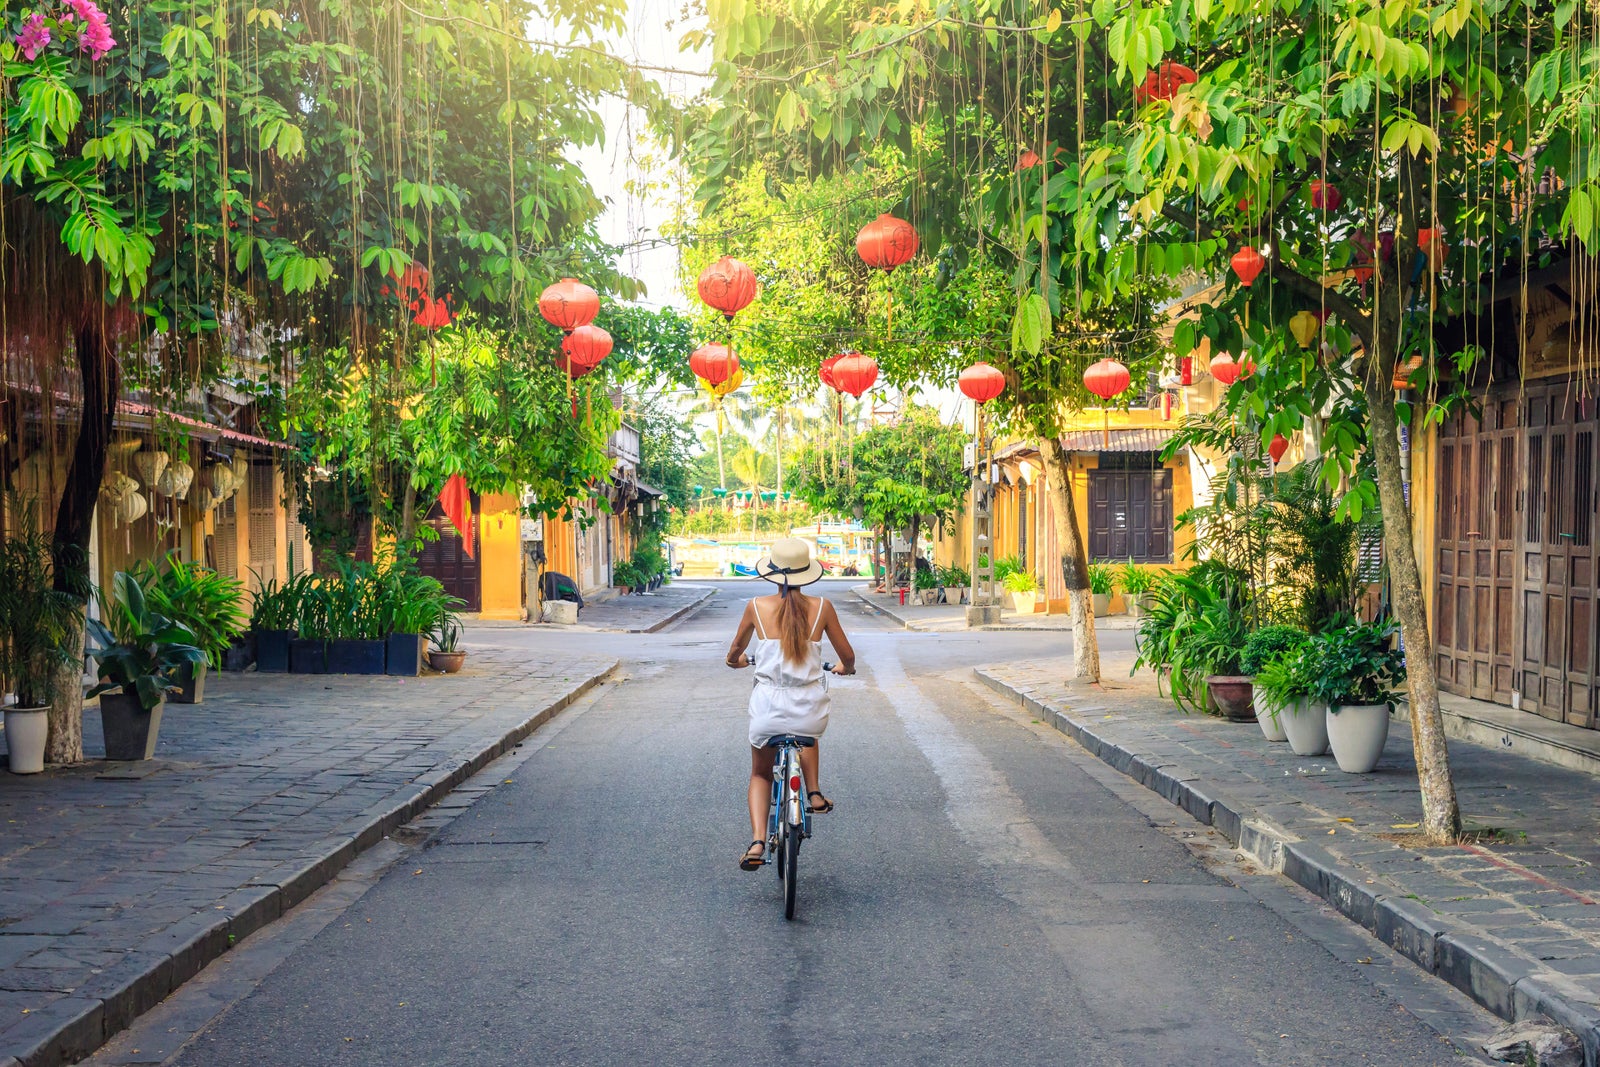 Women visiting the old city of Hoi An in Vietnam by bike during morning